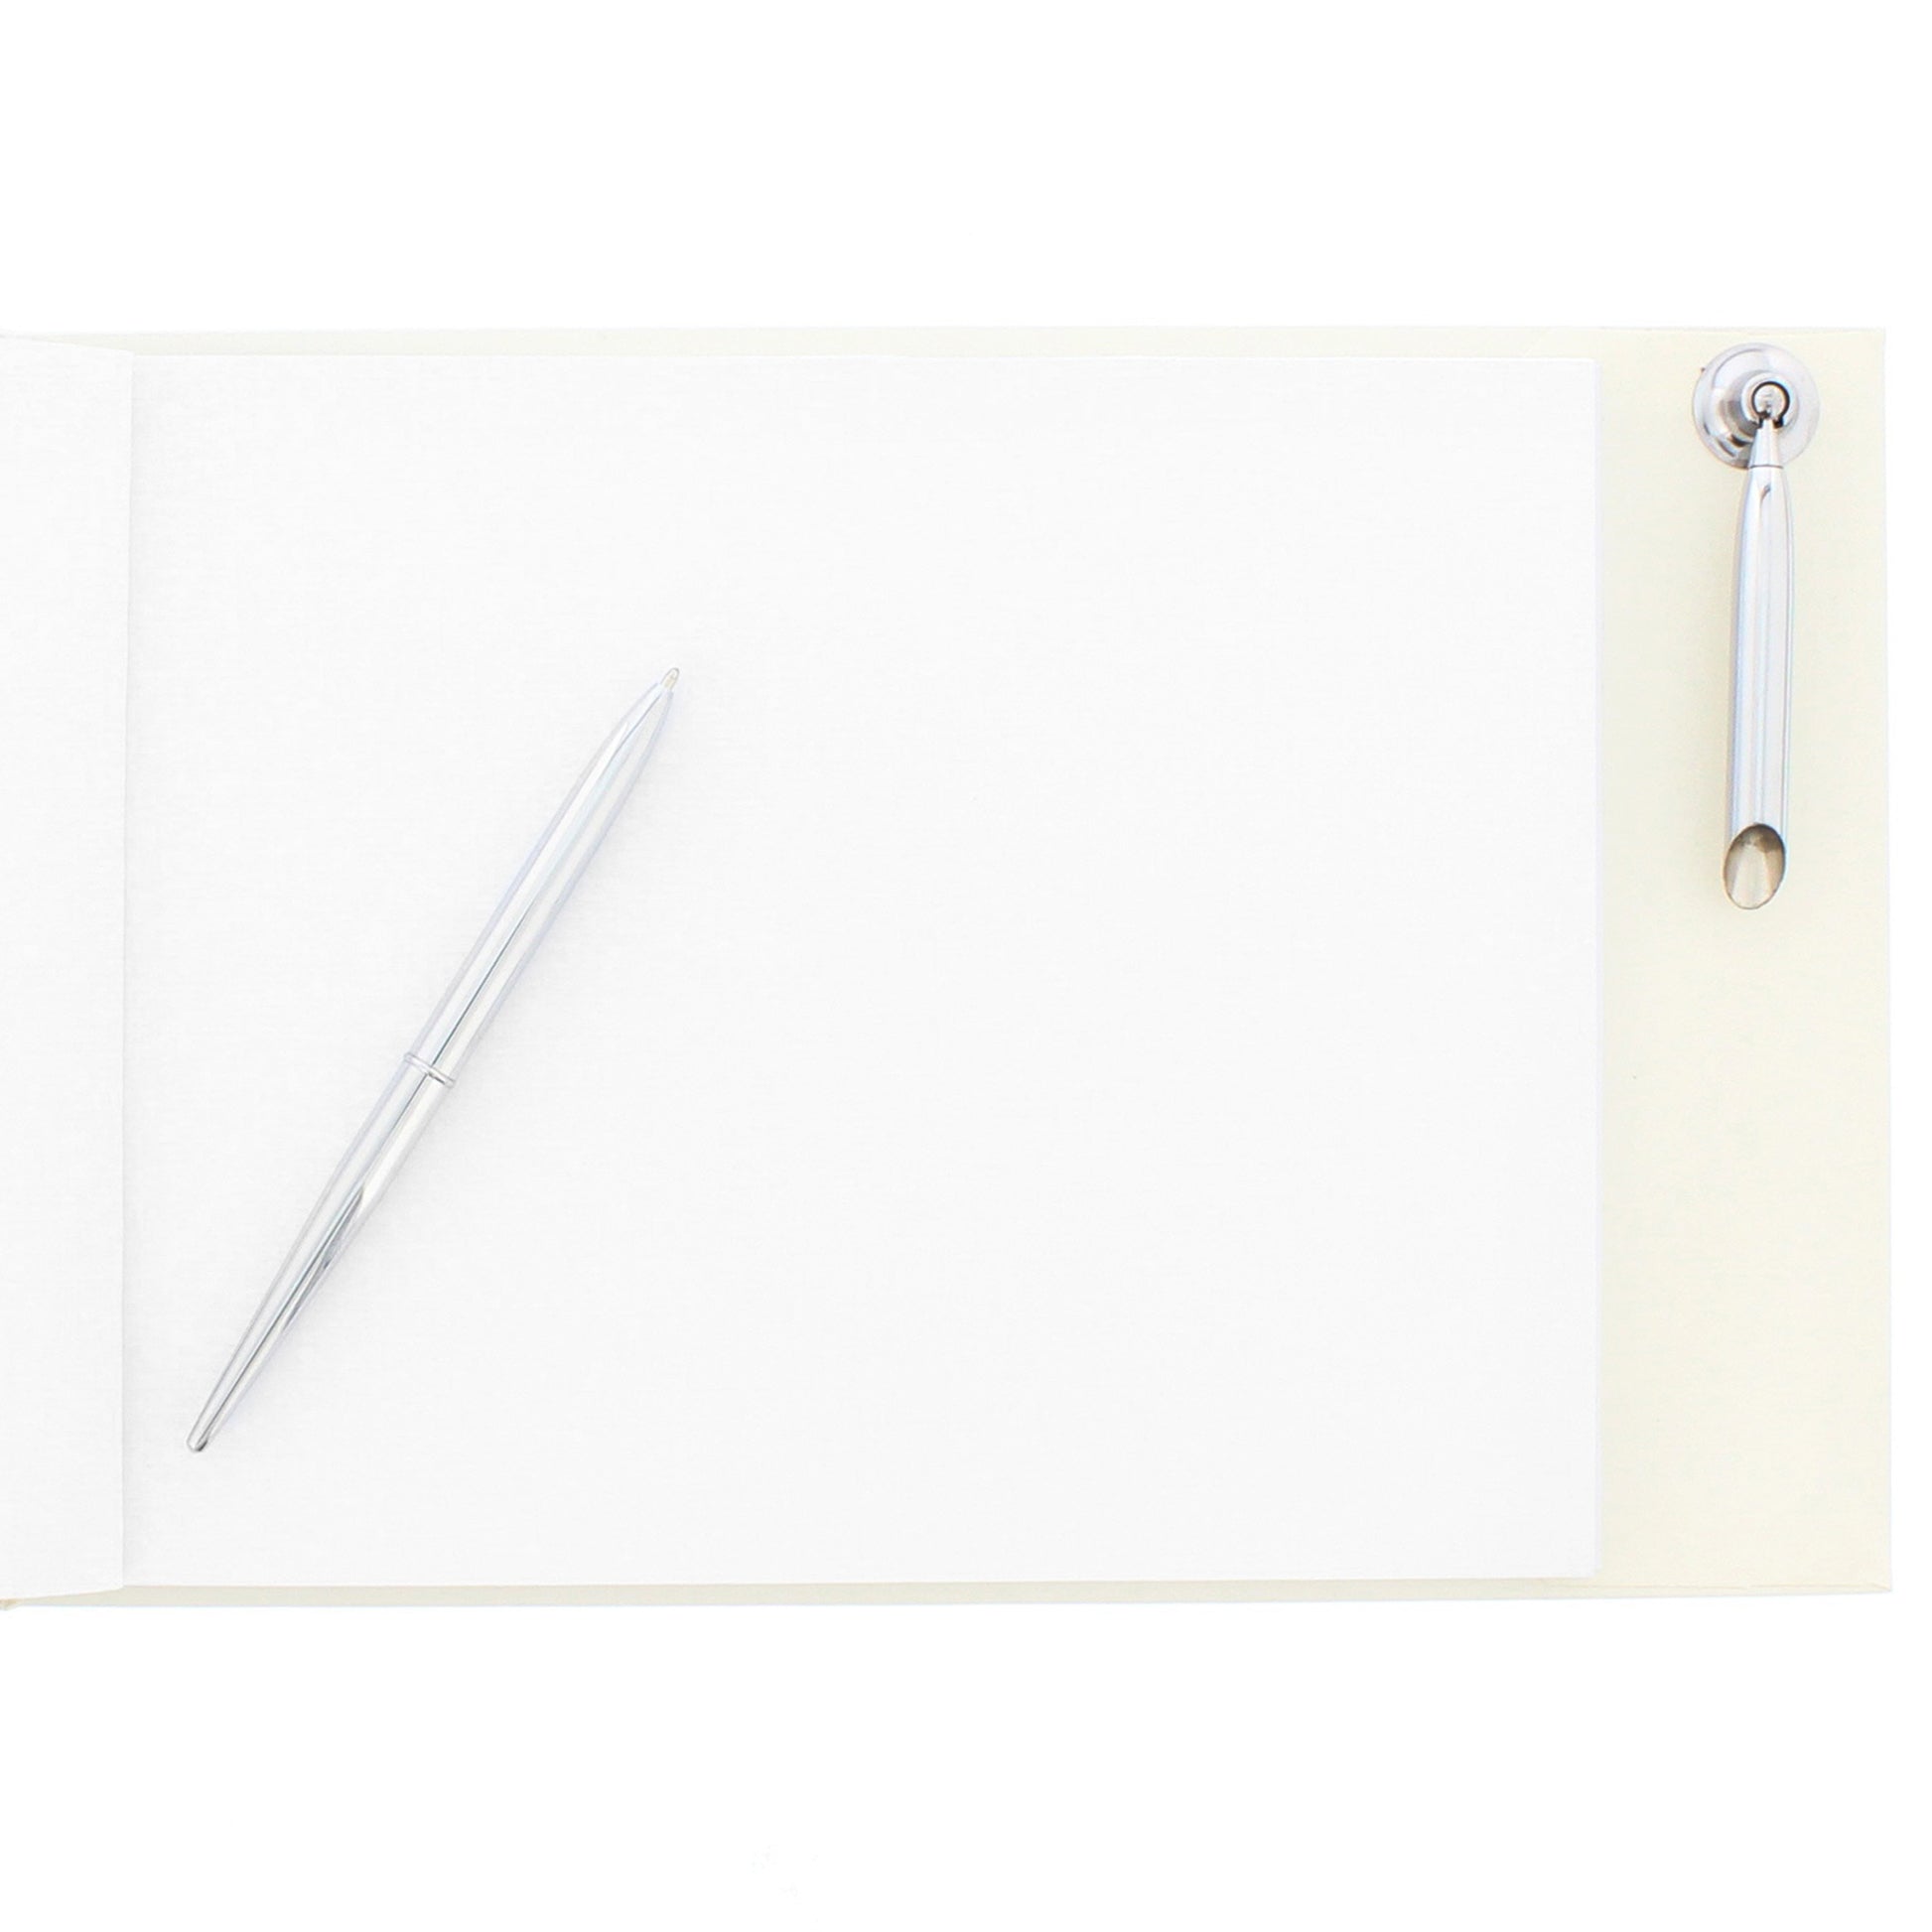 Our Greatest Adventure has just Begun, personalised wedding guest book showing pen and holder